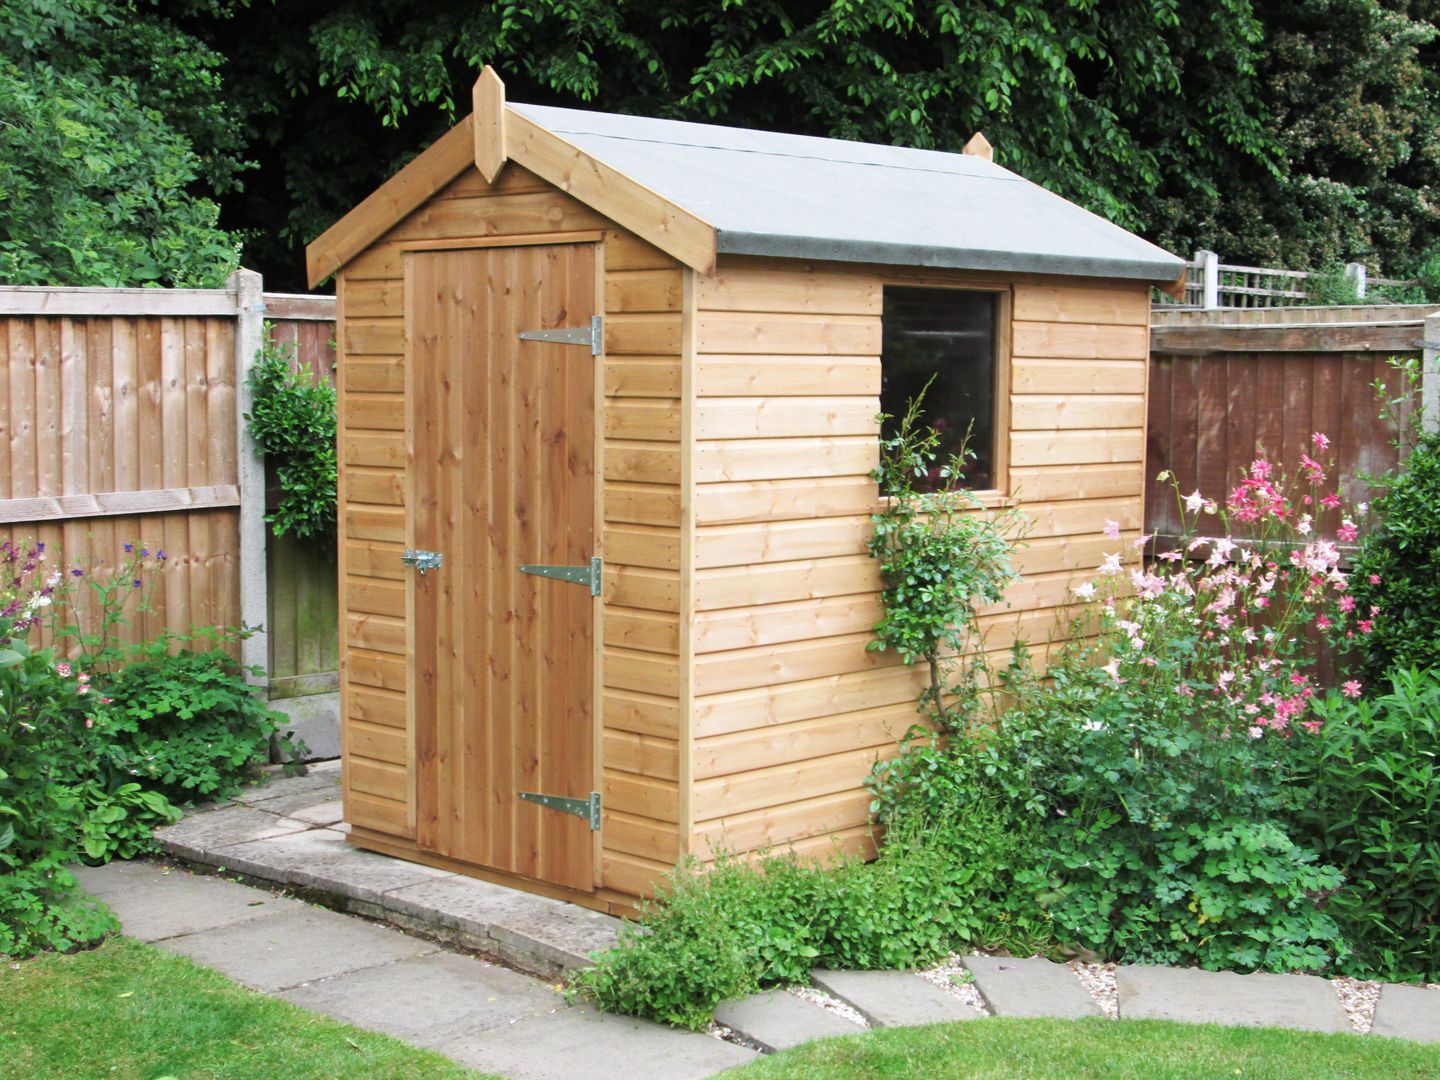 Classic Shed CraneGardenBuildings Classic style garage/shed Garages & sheds